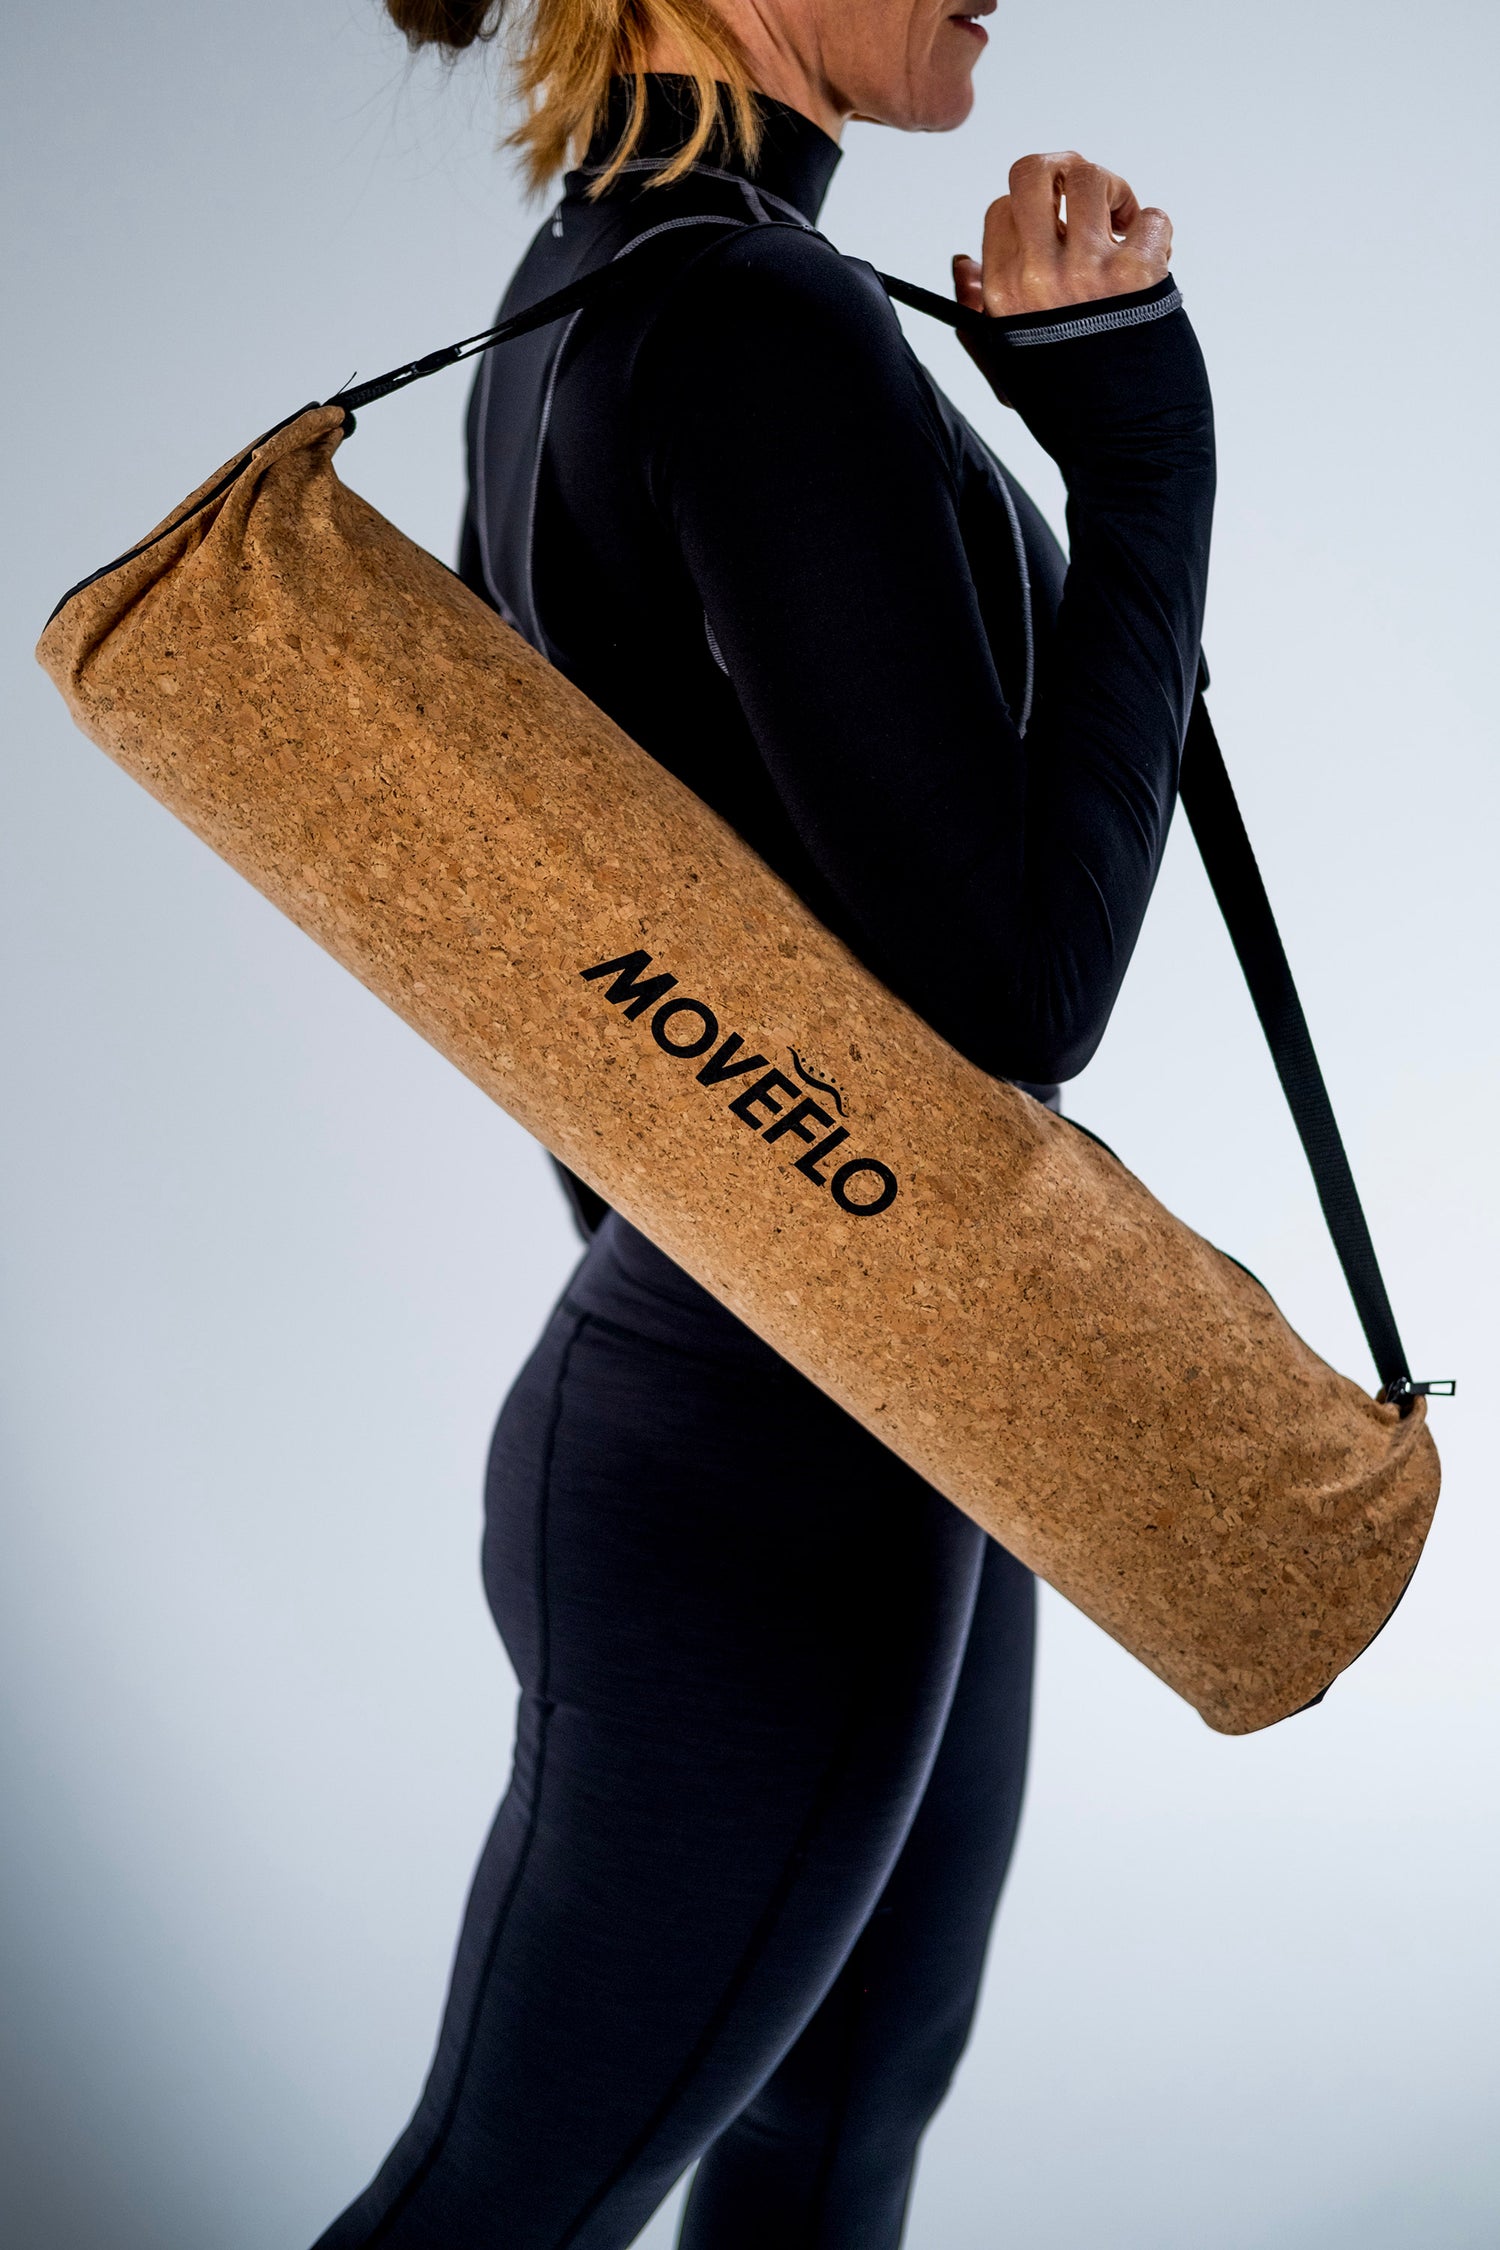 pilates mat in bag being carried on shoulder